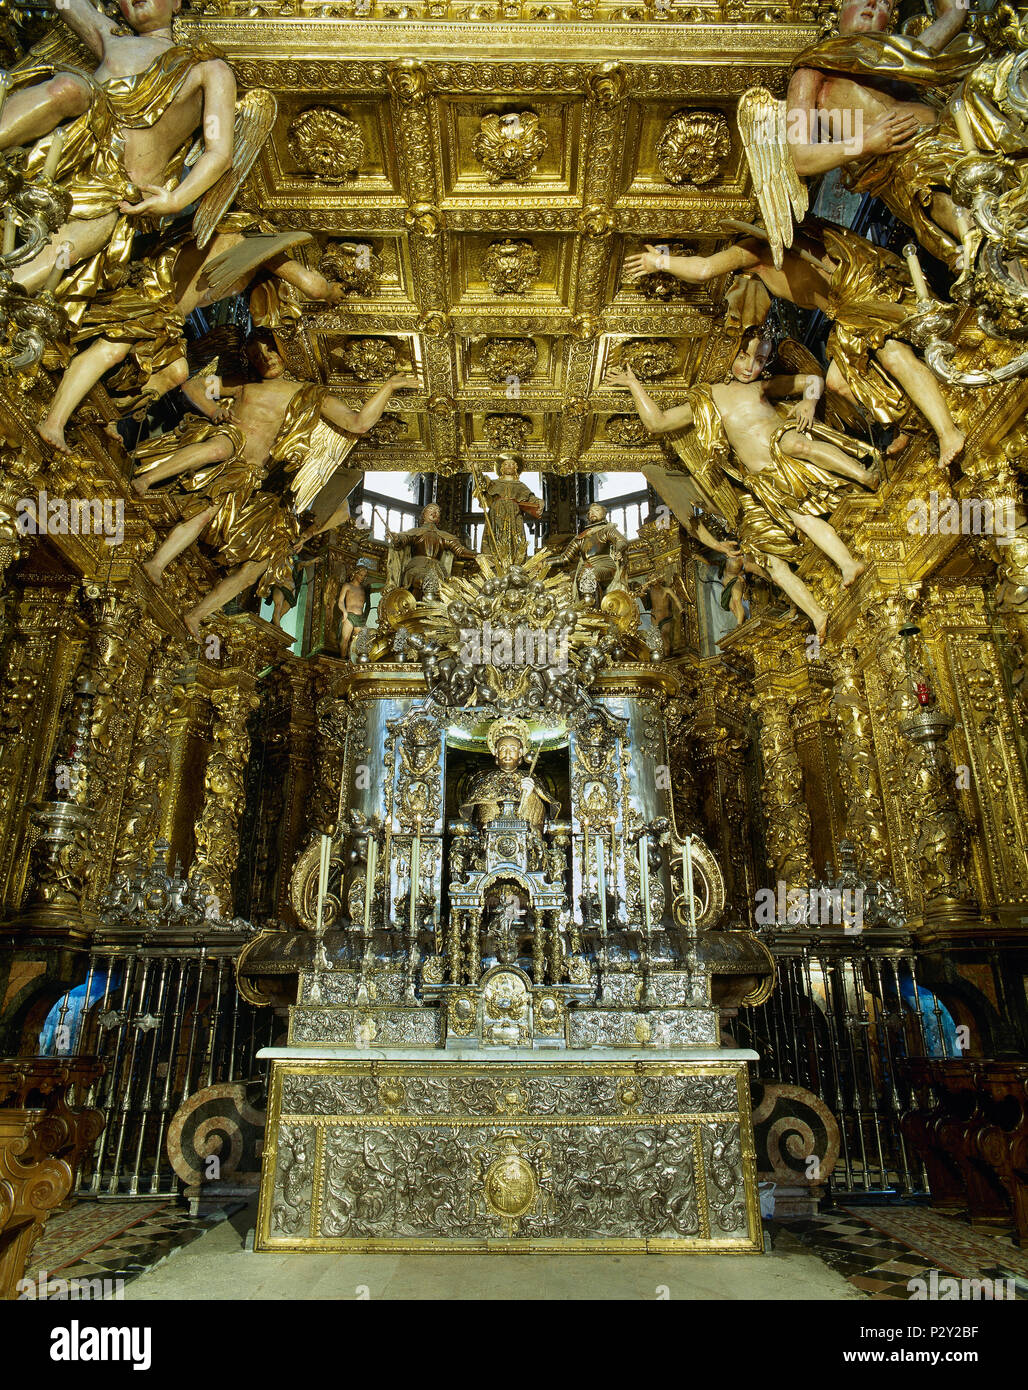 Main altar of the Cathedral of Santiago de Compostela. Gothic altar remodeled in exuberant baroque by Jose Vega y Verdugo. The Baldachin,17th century, author Domingo de Andrade (1639-1712). A bejeweled medieval statue of St. James (12th century). Santiago de Compostela Cathedral. Santiago de Compostela, province of La Coruña, Galicia, Spain. Stock Photo